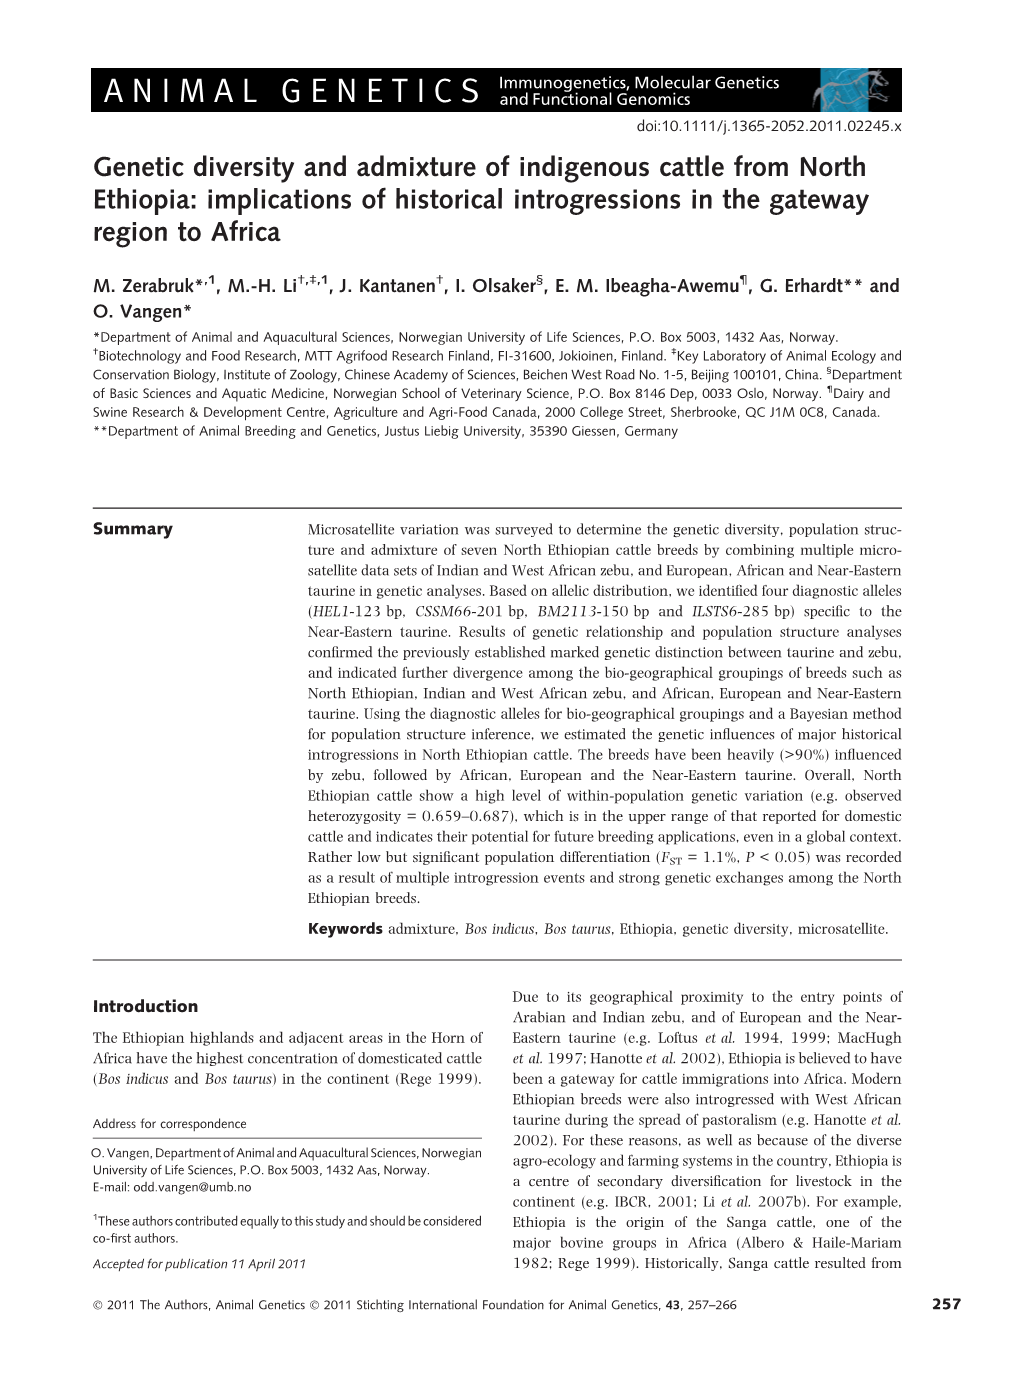 Genetic Diversity and Admixture of Indigenous Cattle from North Ethiopia: Implications of Historical Introgressions in the Gateway Region to Africa